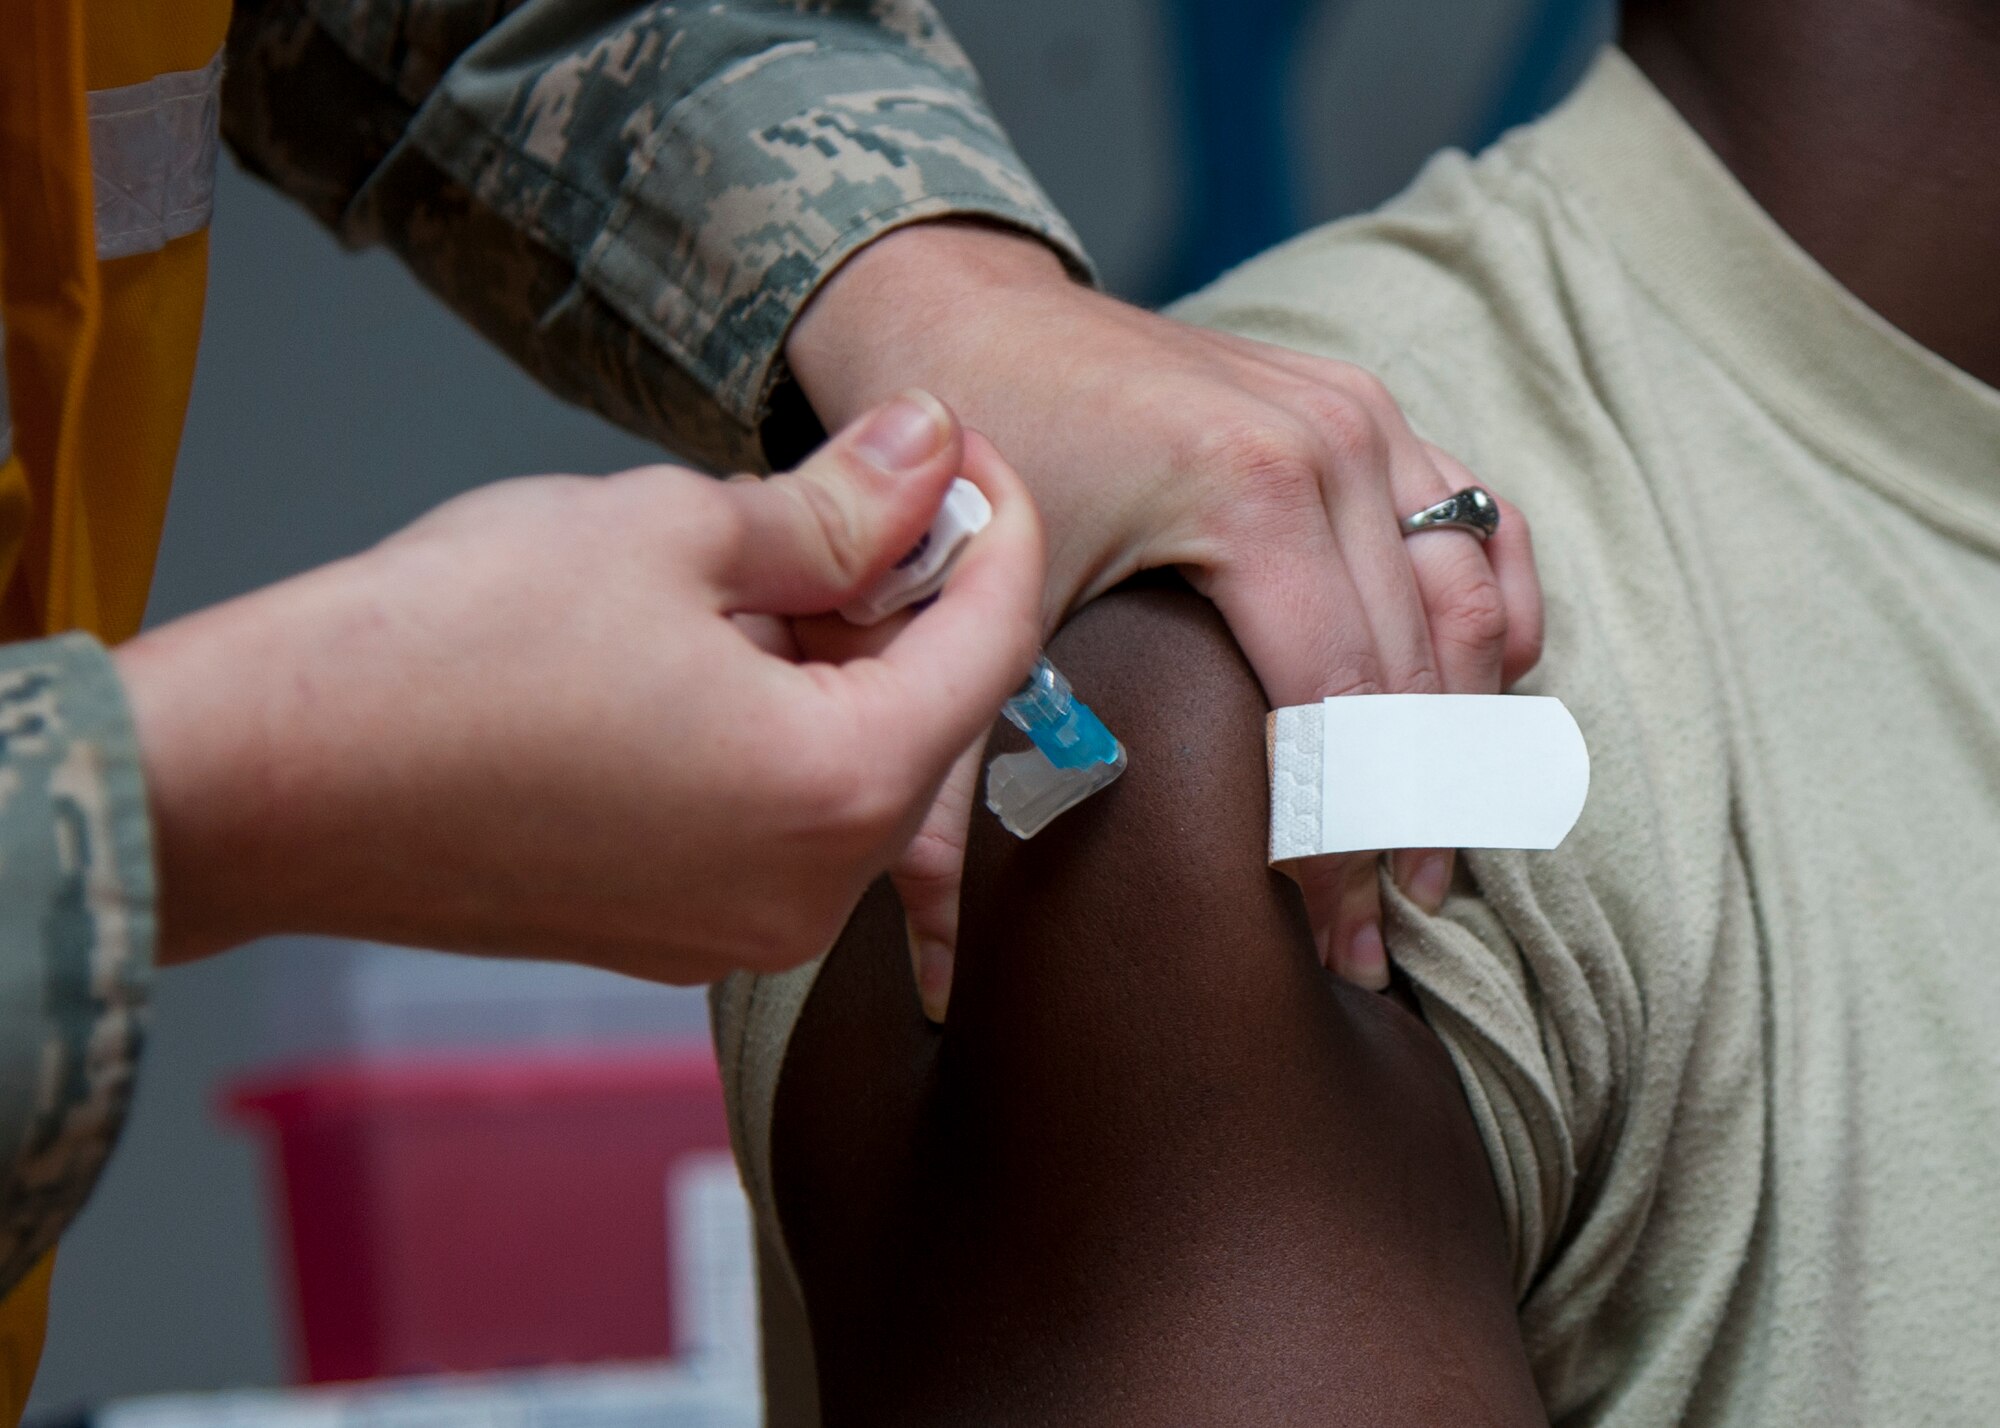 An Airman receives the influenza vaccination at Kirtland Air Force Base, N.M., Oct. 24. Flu vaccines do not contain live flu virus and are mandatory for all military members. (U.S. Air Force photo by Staff Sgt. J.D. Strong II)